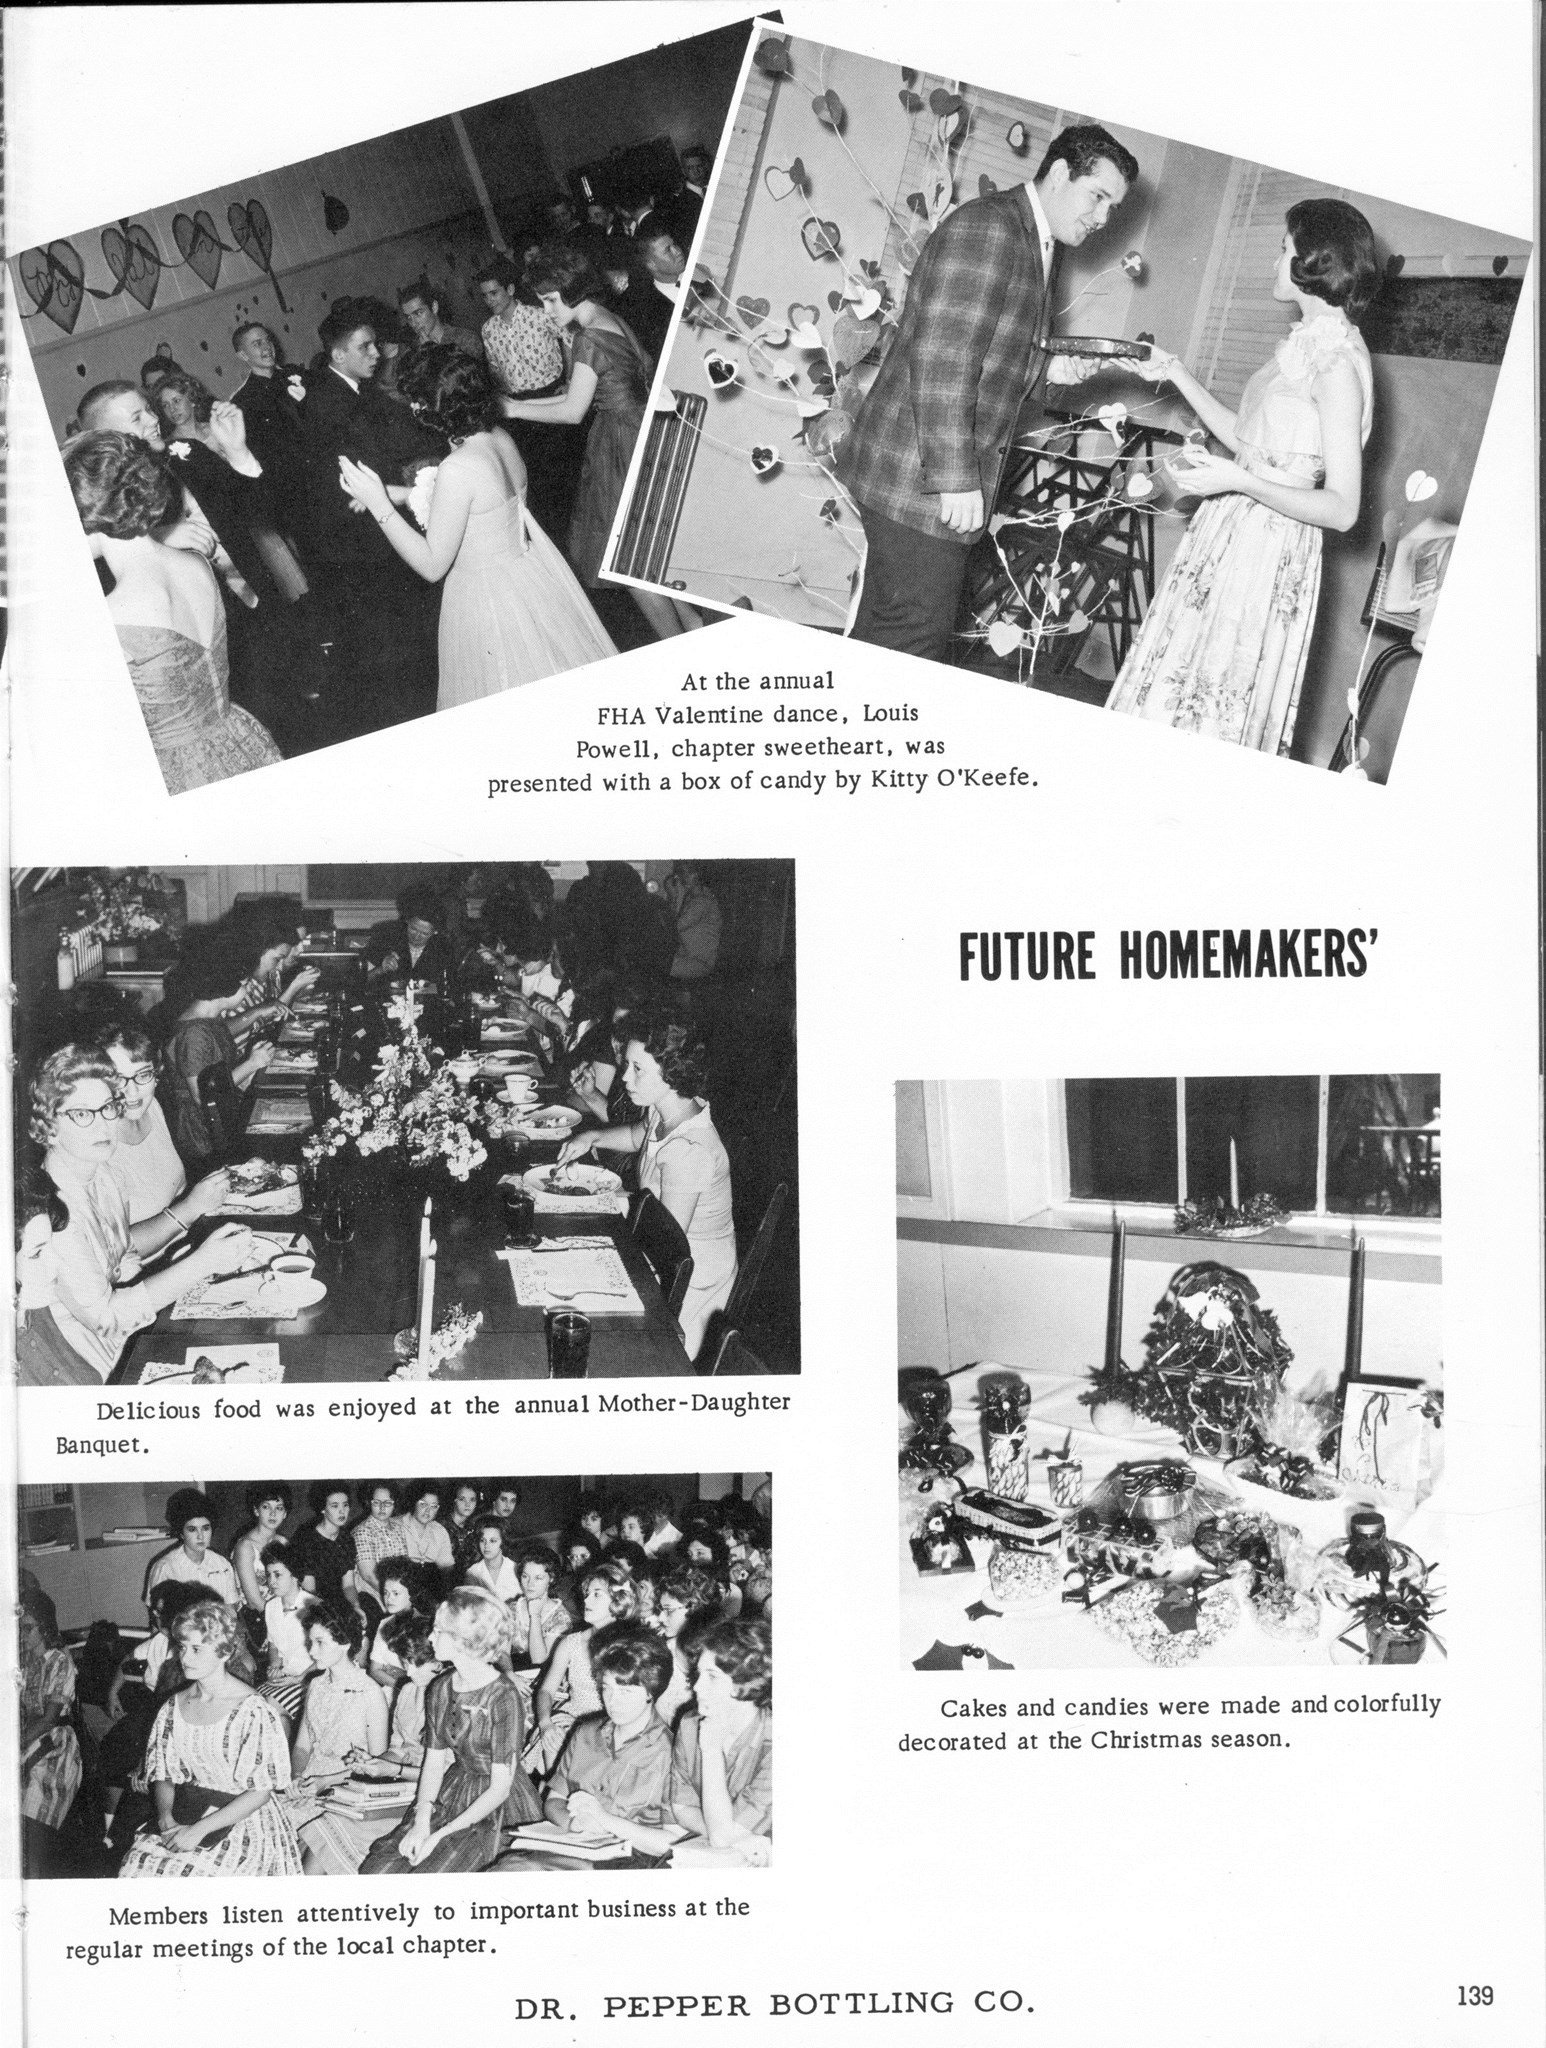 ../../../Images/Large/1963/Arclight-1963-pg0139.jpg